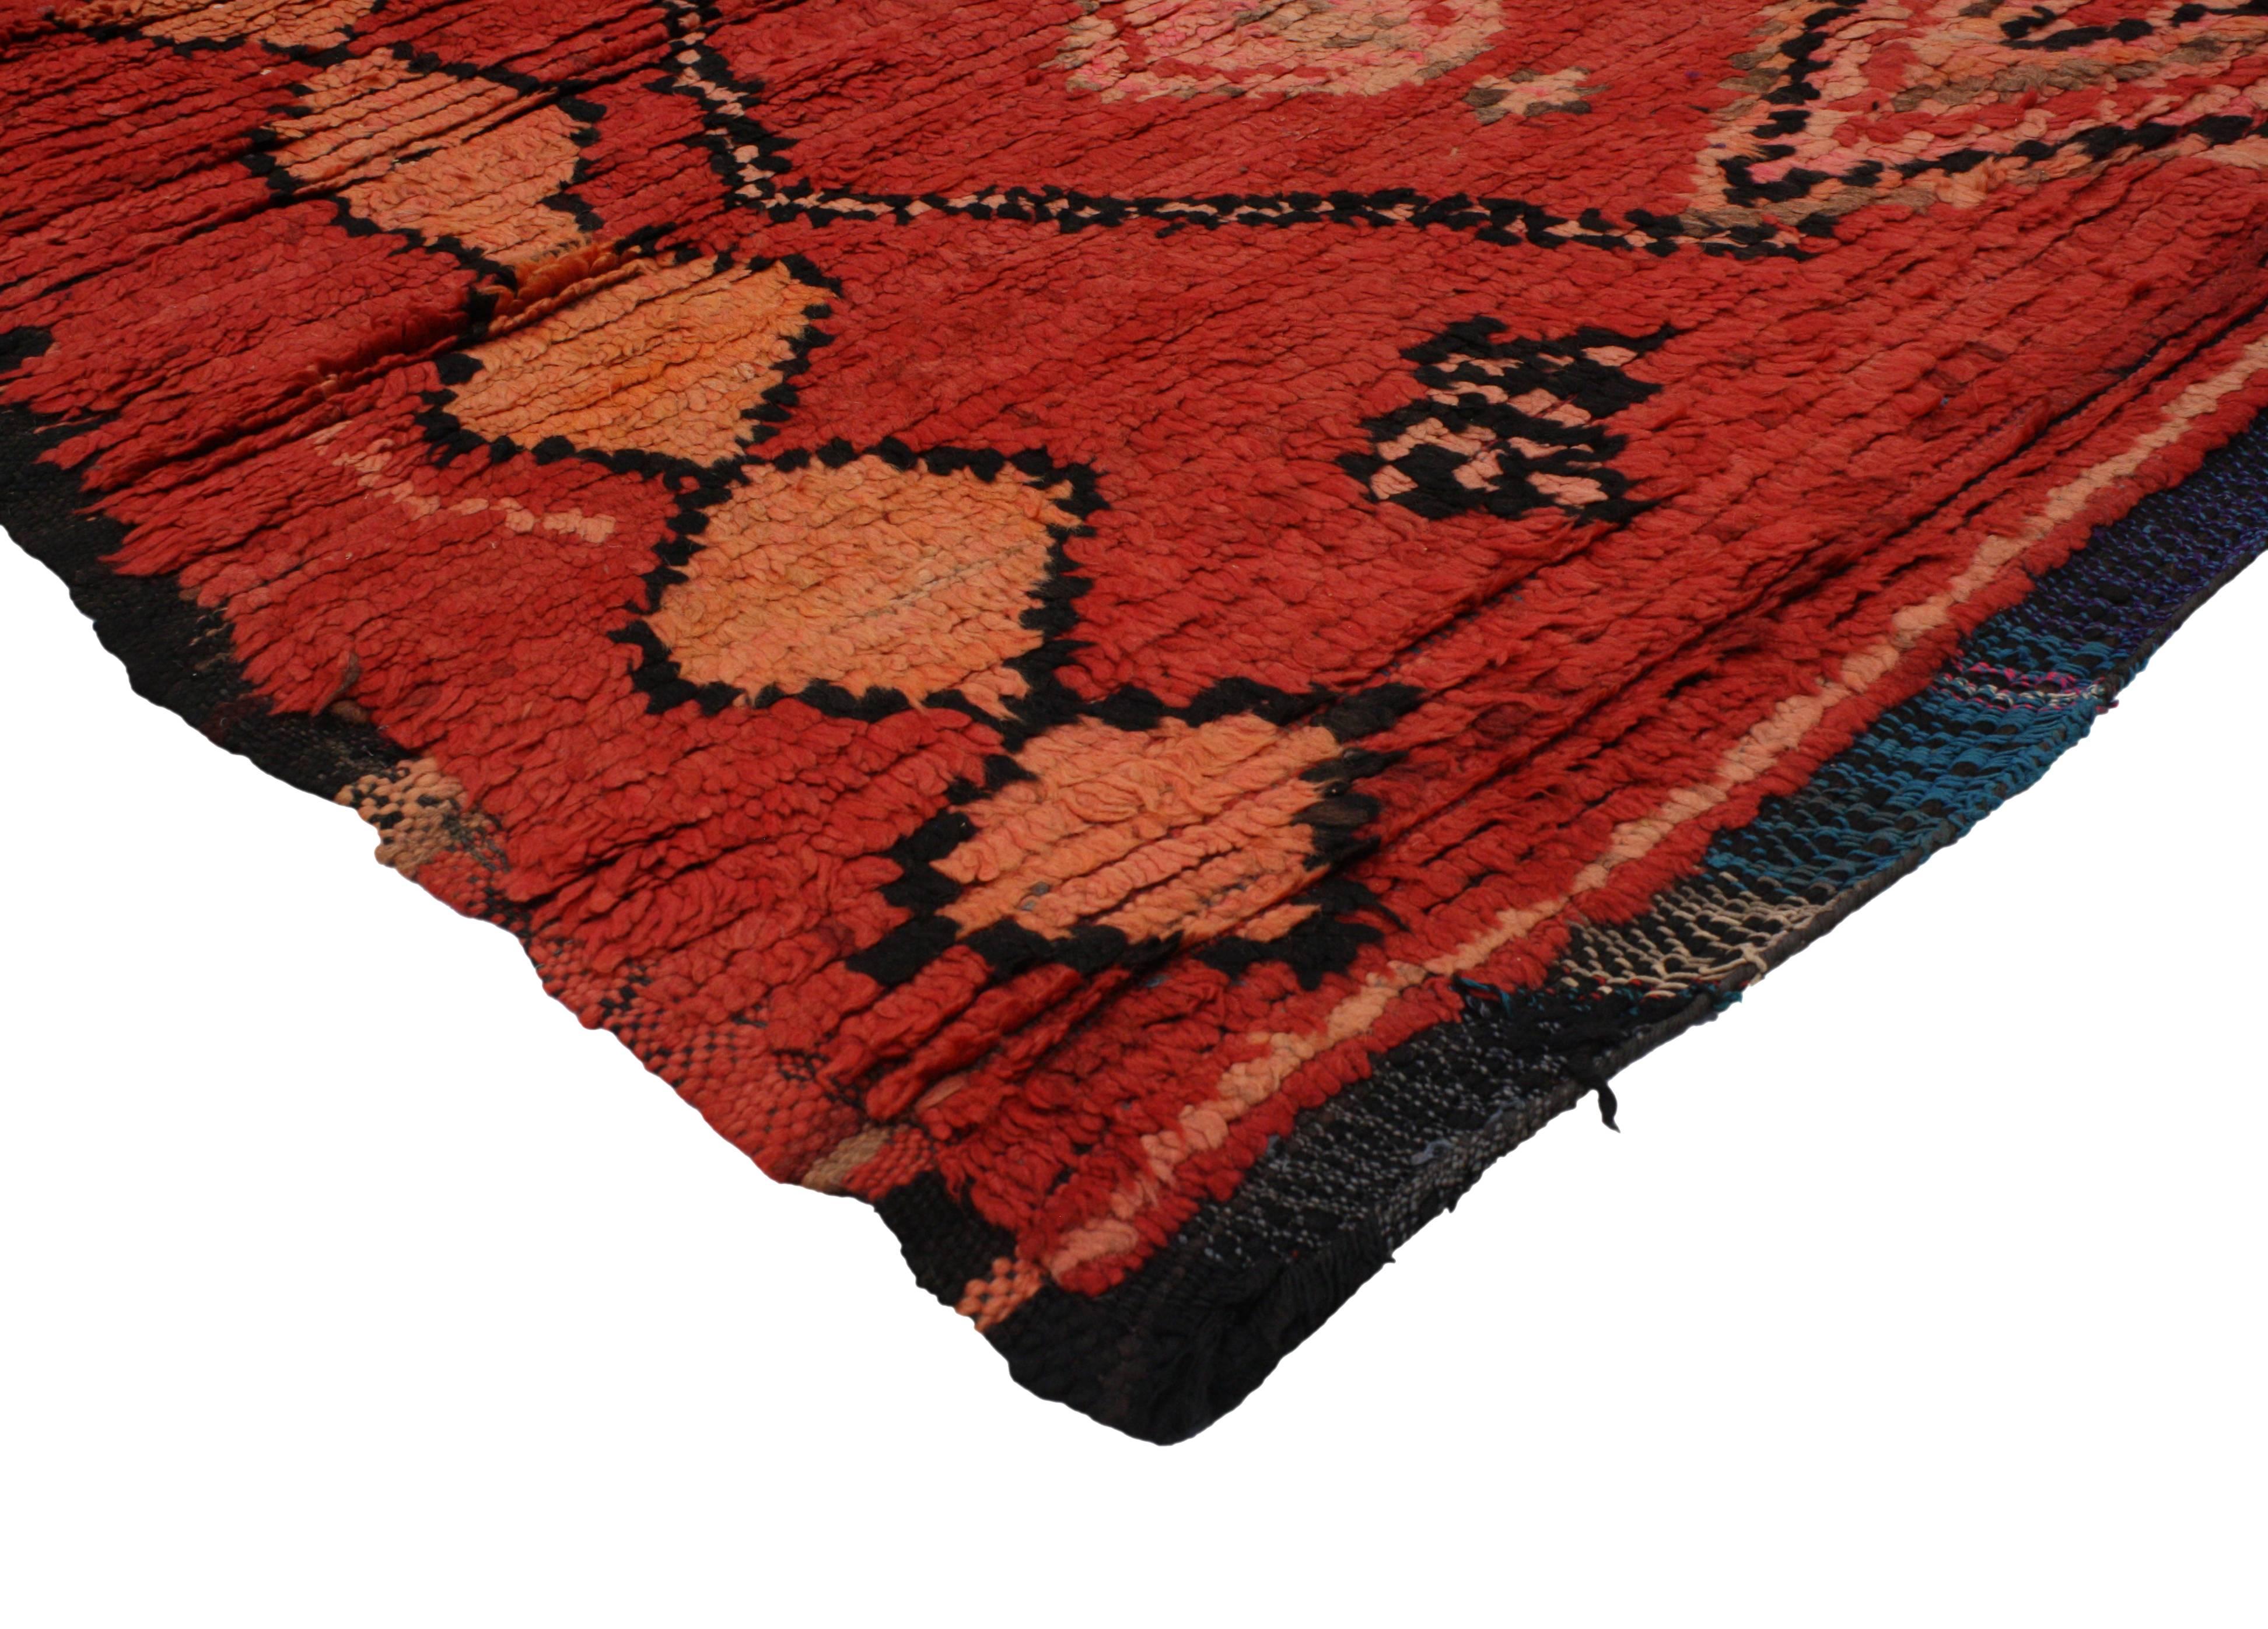 20167 Vintage Berber Moroccan Talsint Rug with Tribal Abstract Expressionist Style. With the bold red color and geometric tribal pattern, this hand-knotted wool vintage Berber Moroccan rug  beautifully embodies Abstract Expressionist style. This